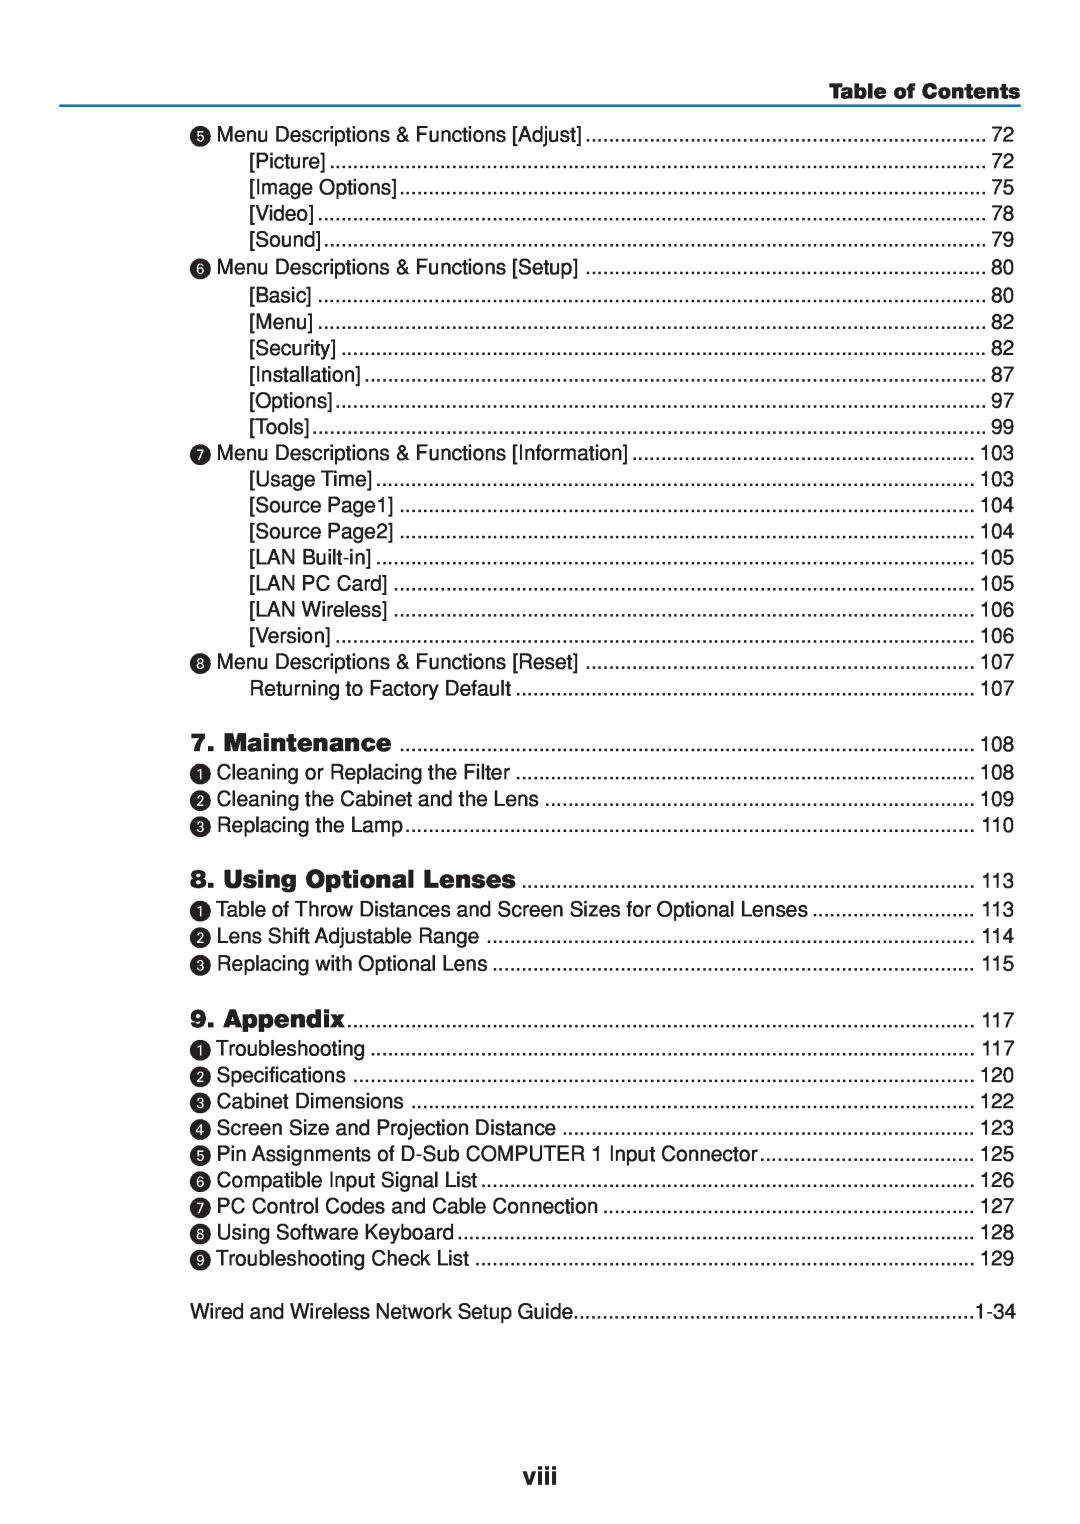 Dukane 8808 user manual viii, 1-34, Table of Contents, Picture 